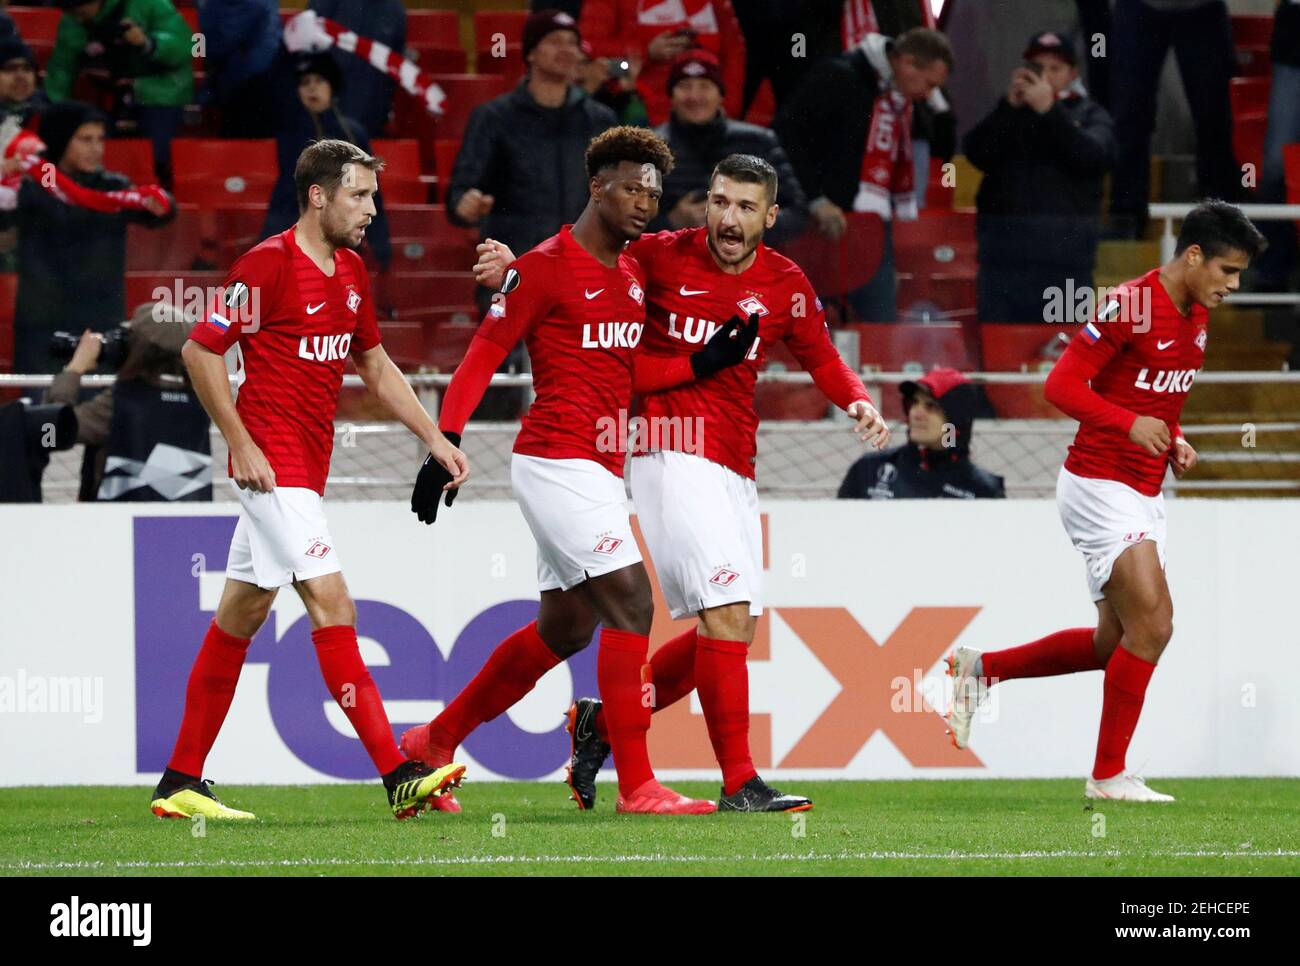 Soccer Football - Europa League - Group Stage - Group G - Spartak Moscow v Villarreal - Spartak Stadium, Moscow, Russia - October 4, 2018  Spartak Moscow's Ze Luis celebrates scoring their first goal with Salvatore Bocchetti and team mates  REUTERS/Sergei Karpukhin Stock Photo